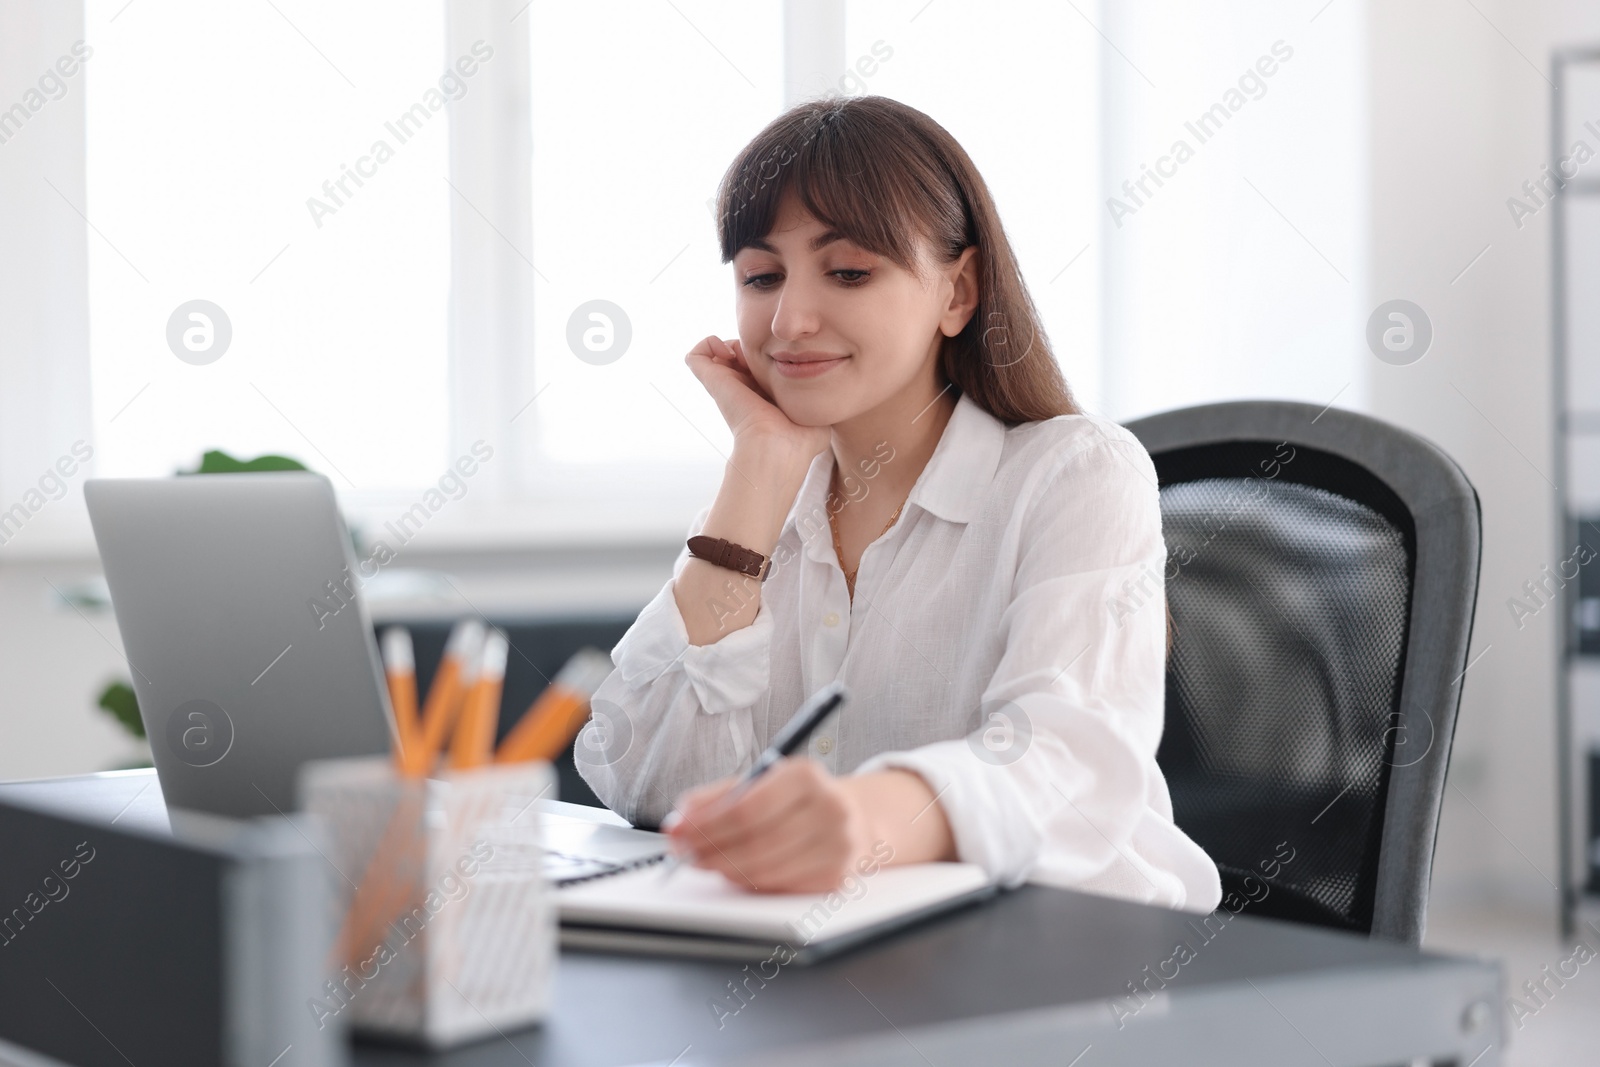 Photo of Woman taking notes during webinar at table indoors